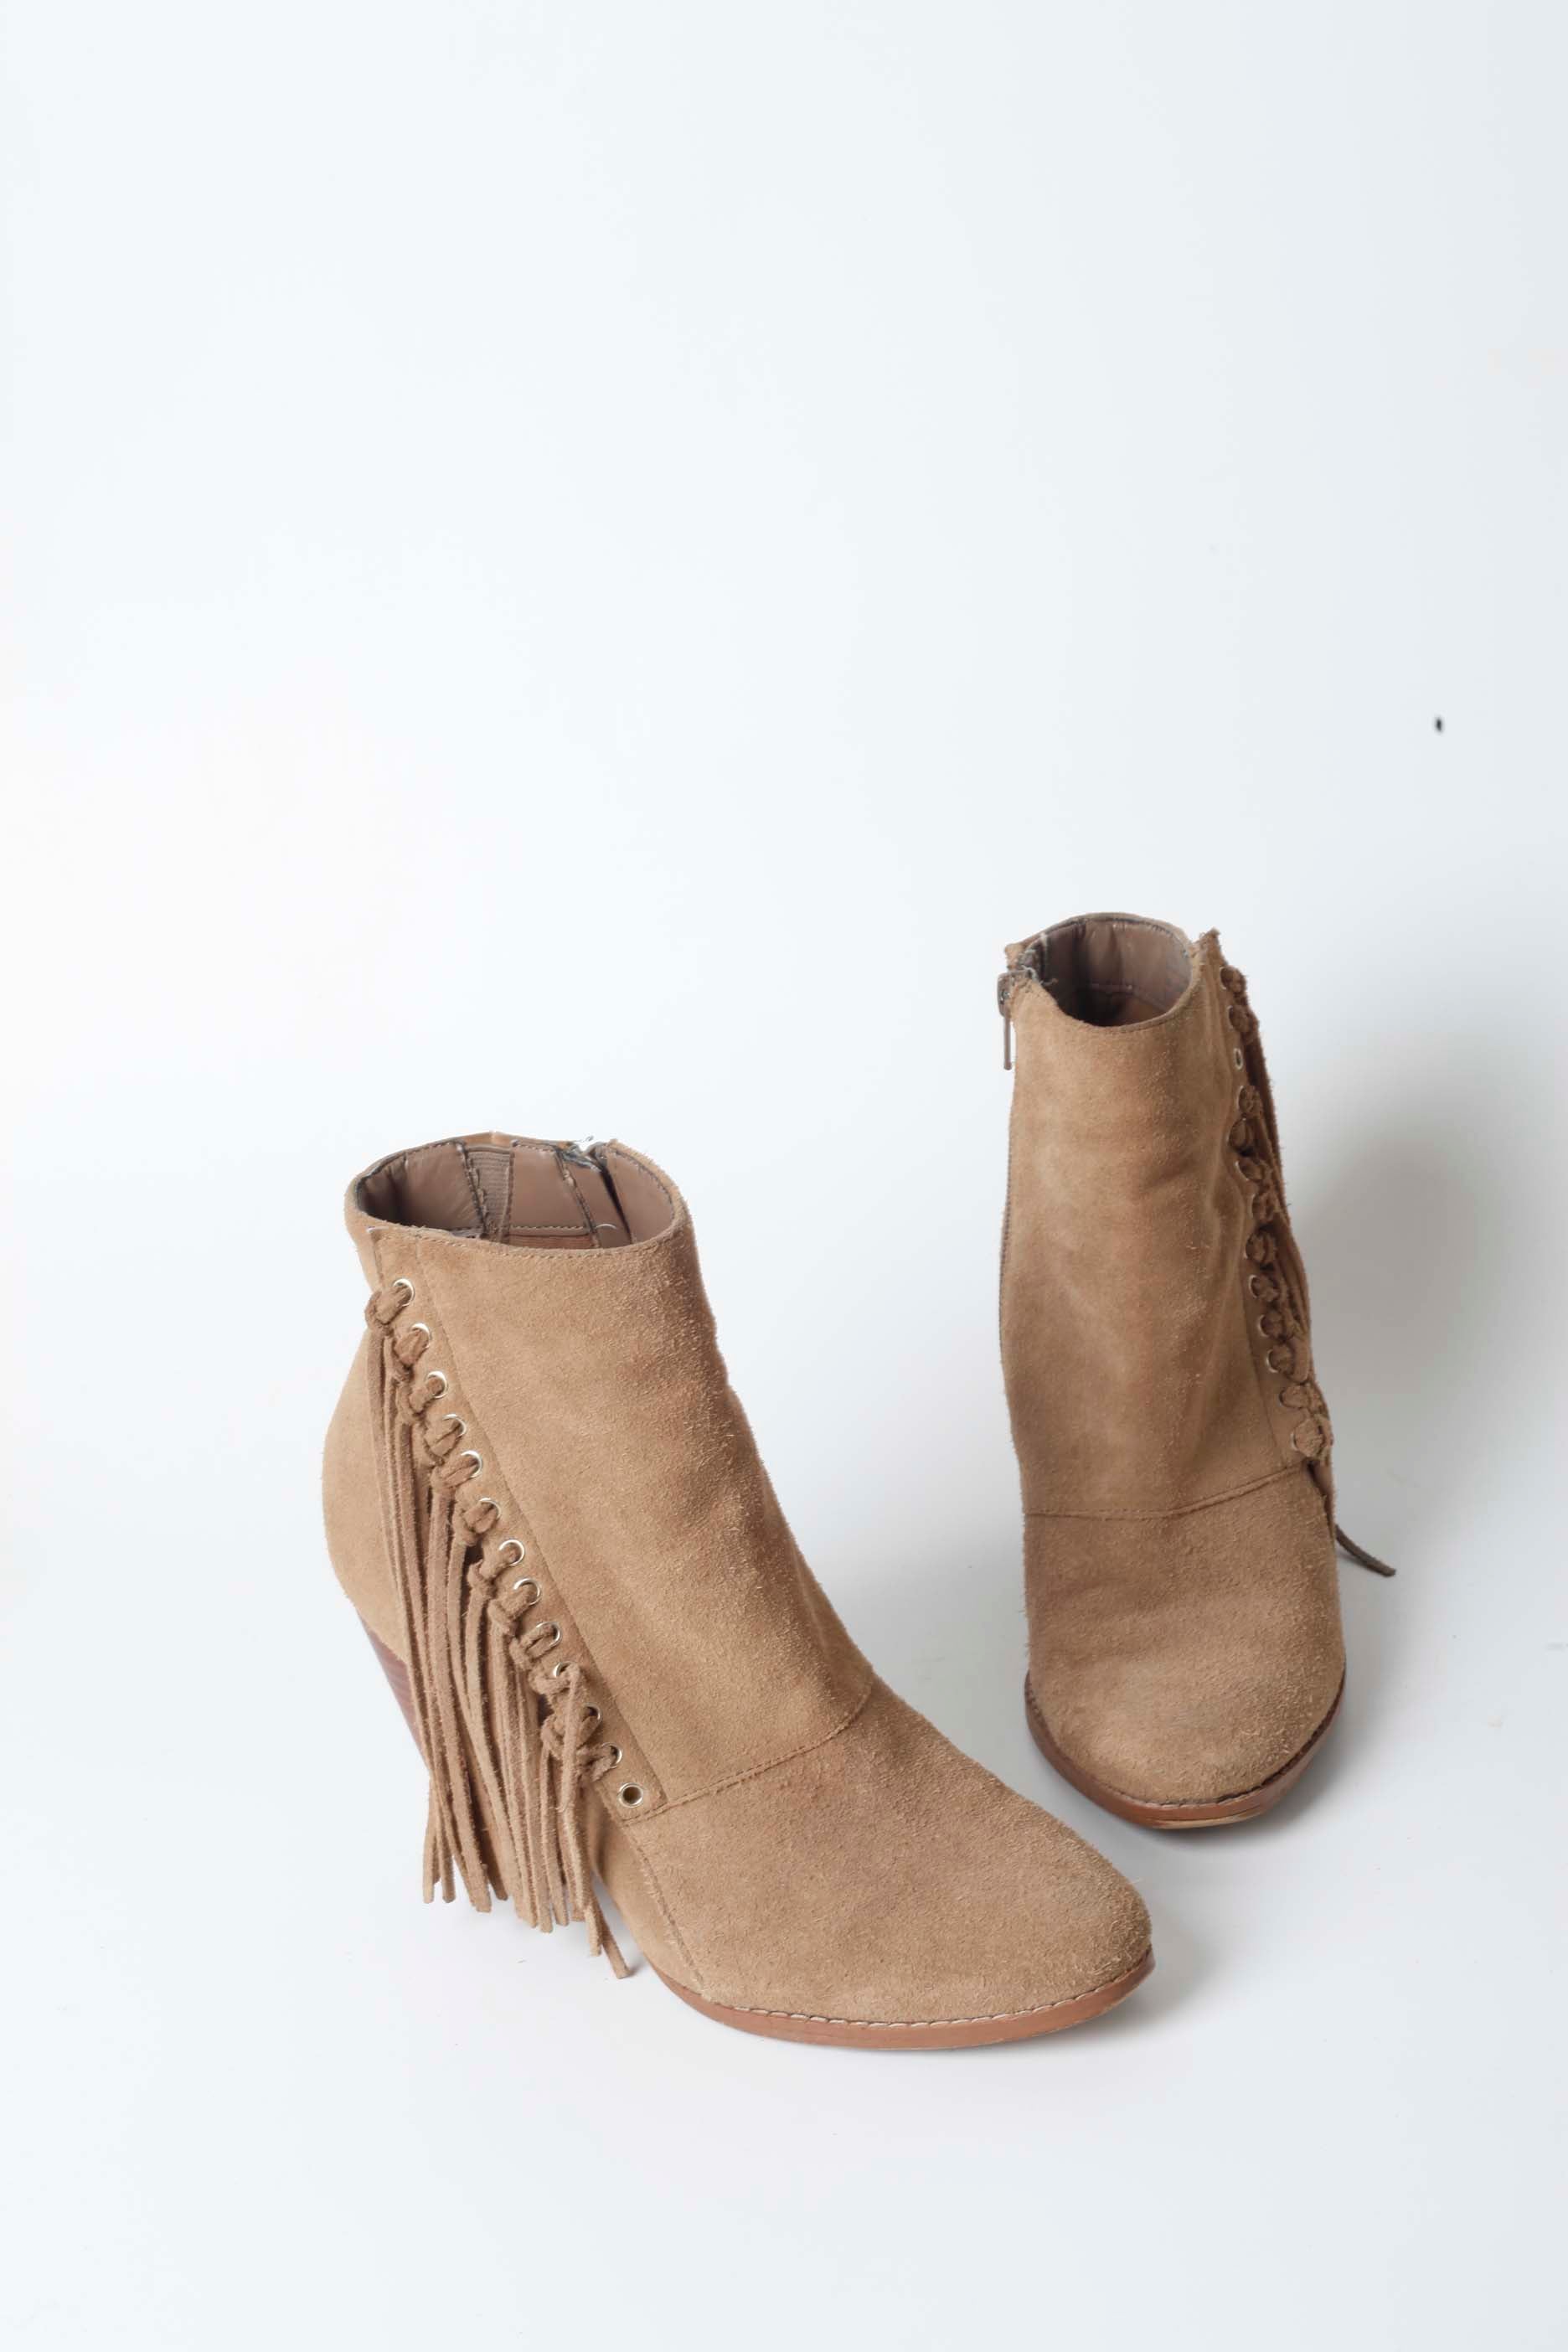 Beige Ankle Boots with Fringe